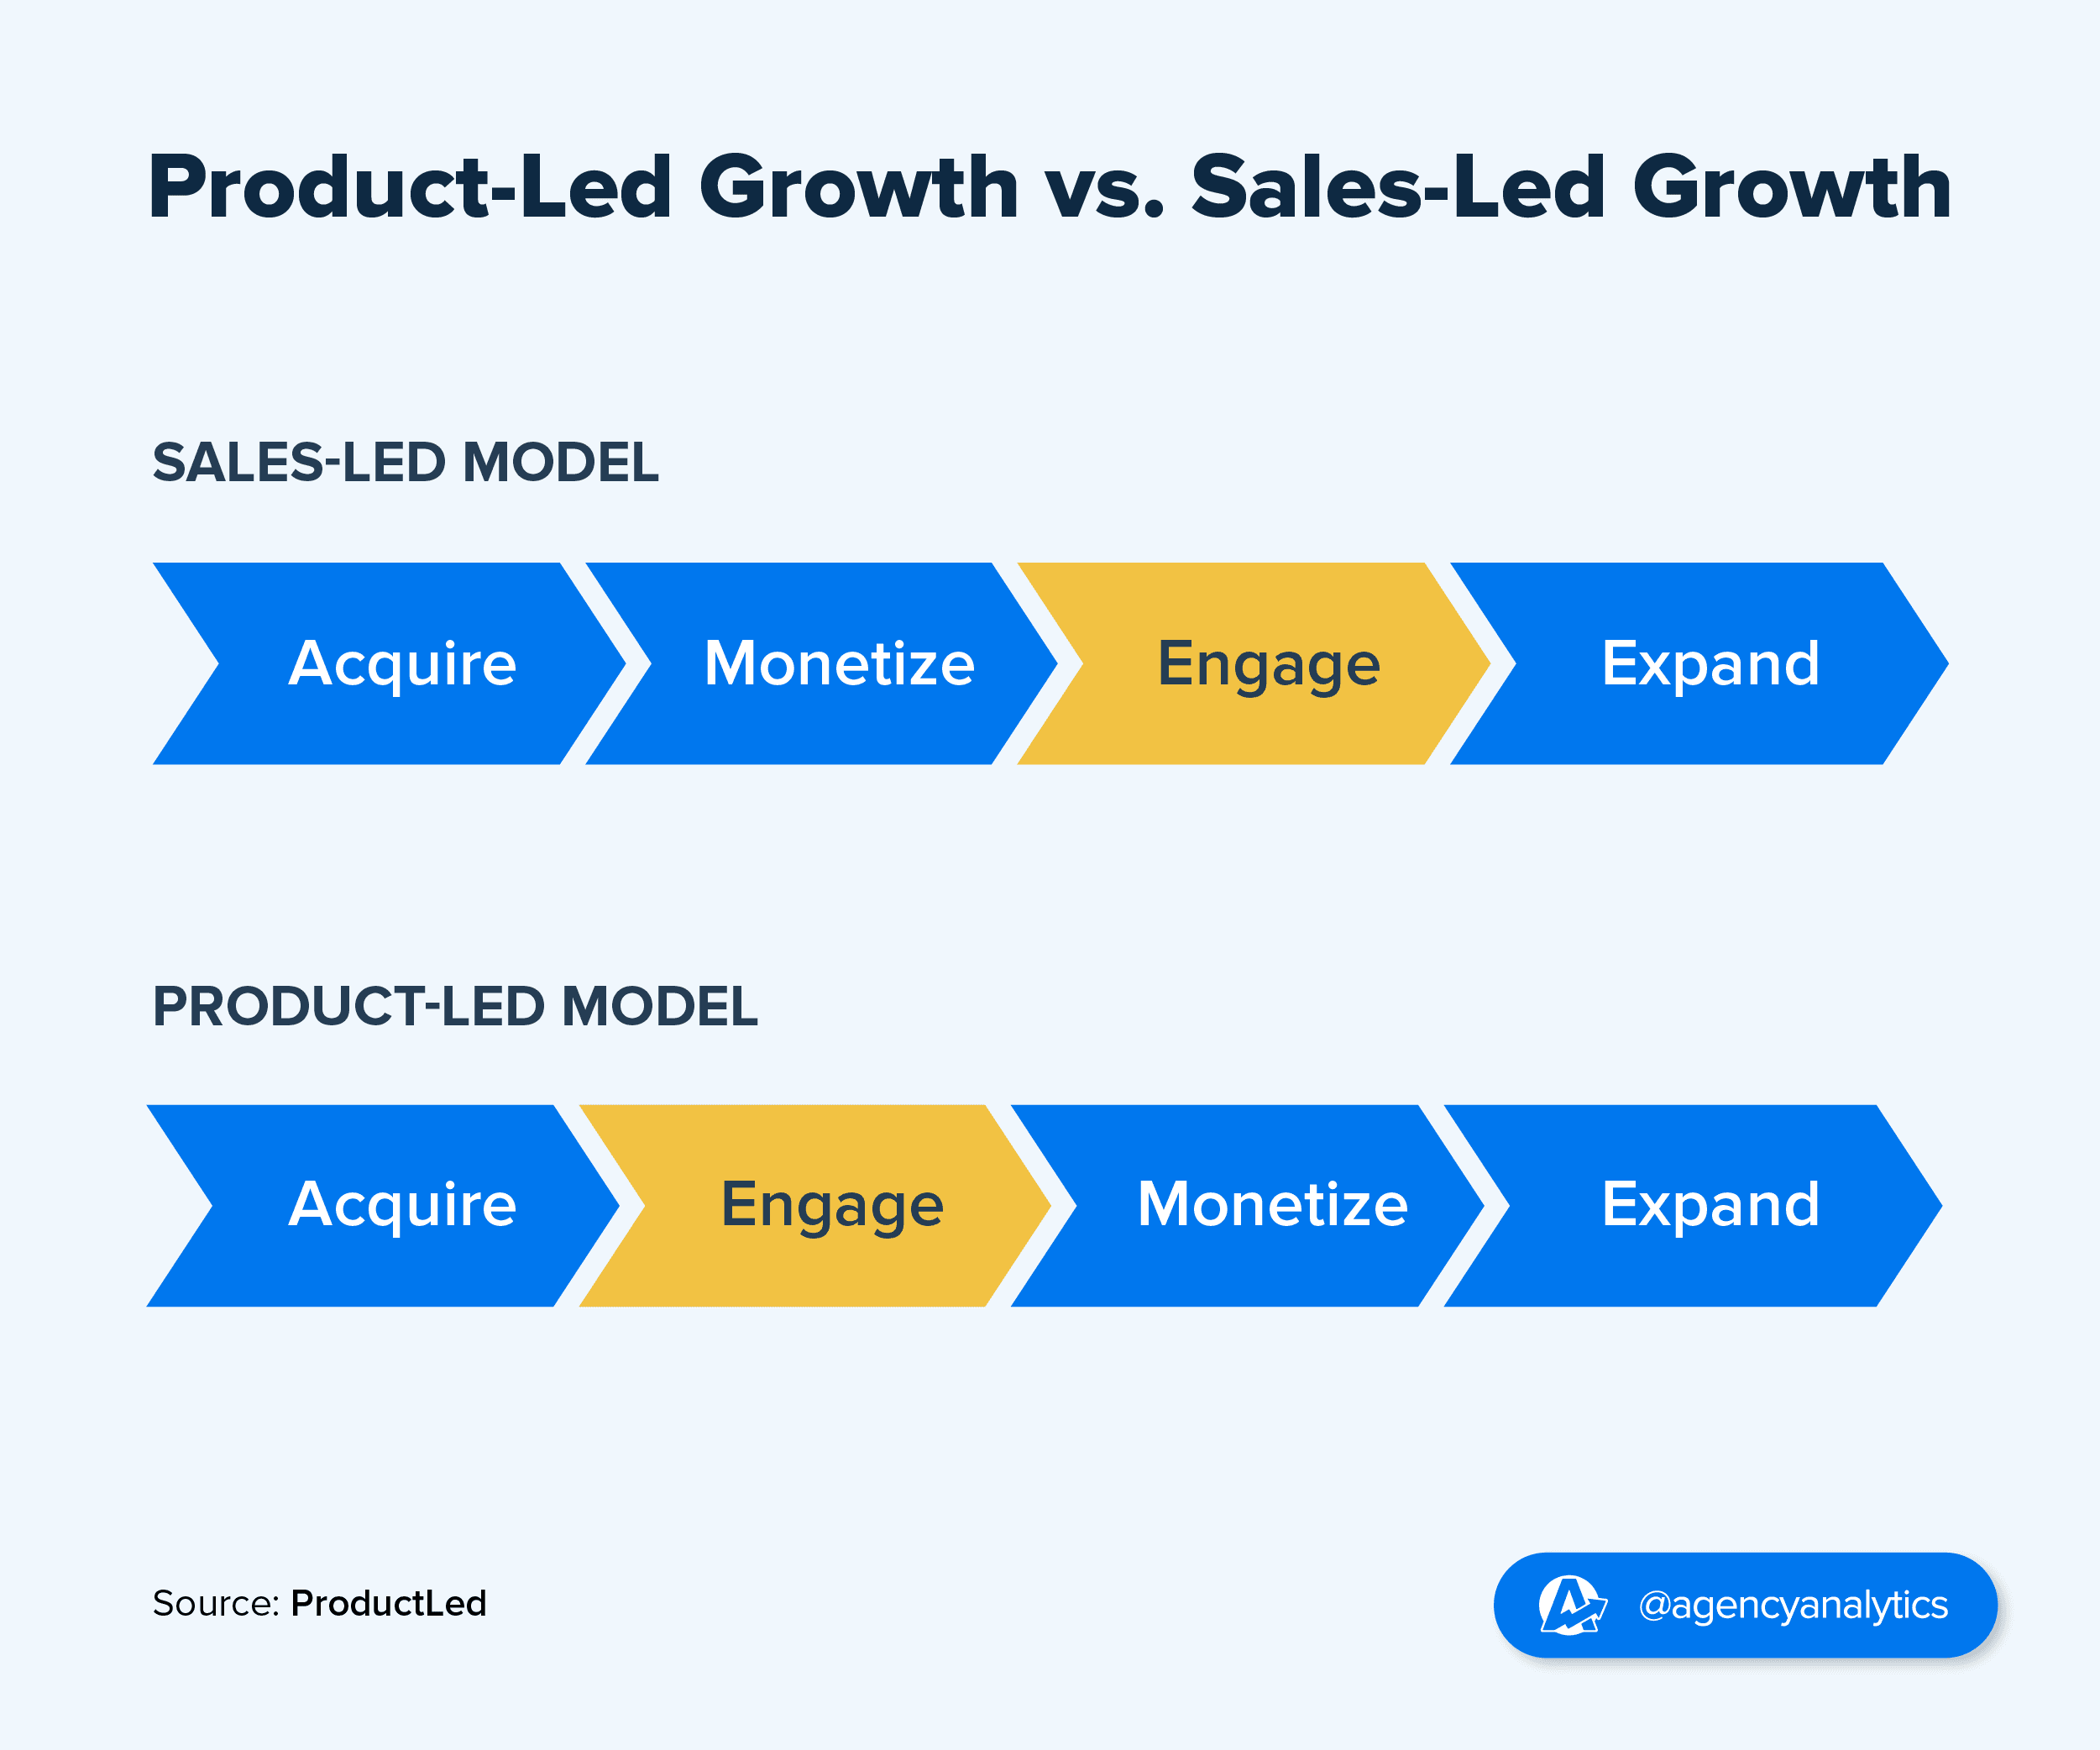 Product-Led Growth vs. Sales Led Growth